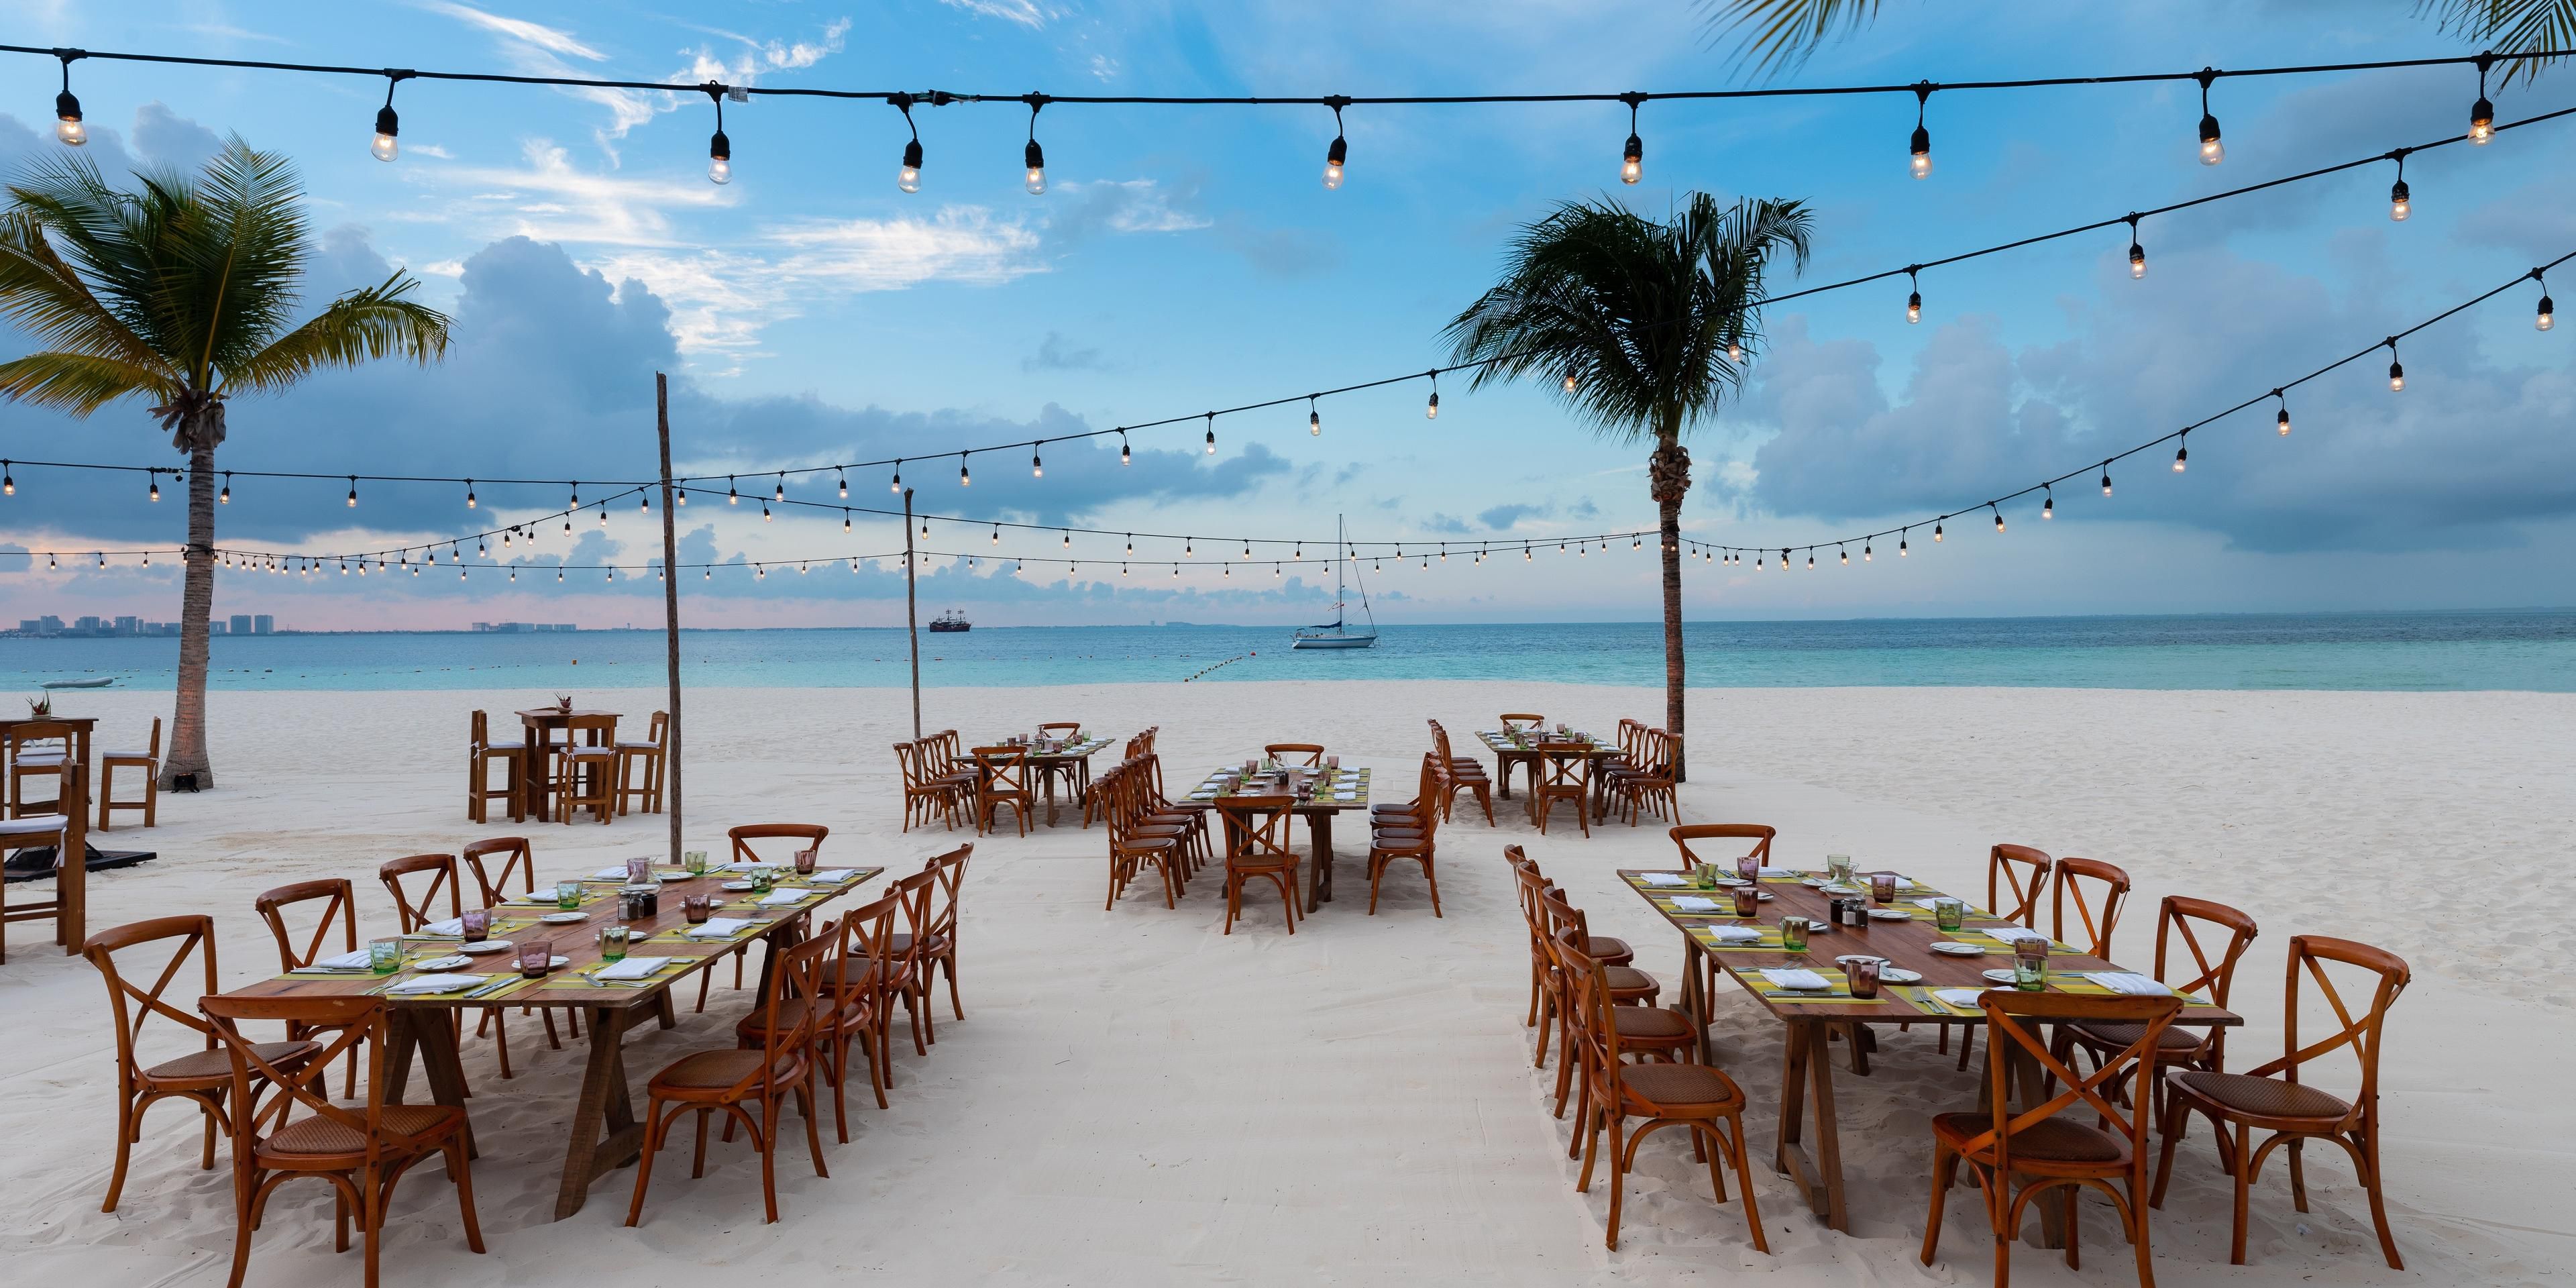 Your dream destination wedding in Cancun is here. Experience breathtaking oceanfront venues, beautiful garden, wonderful ballrooms, a private pool, and a terrace with a unique view. We partner with the most prestigious wedding planners who will take charge of everything so you can enjoy every minute of your special day.